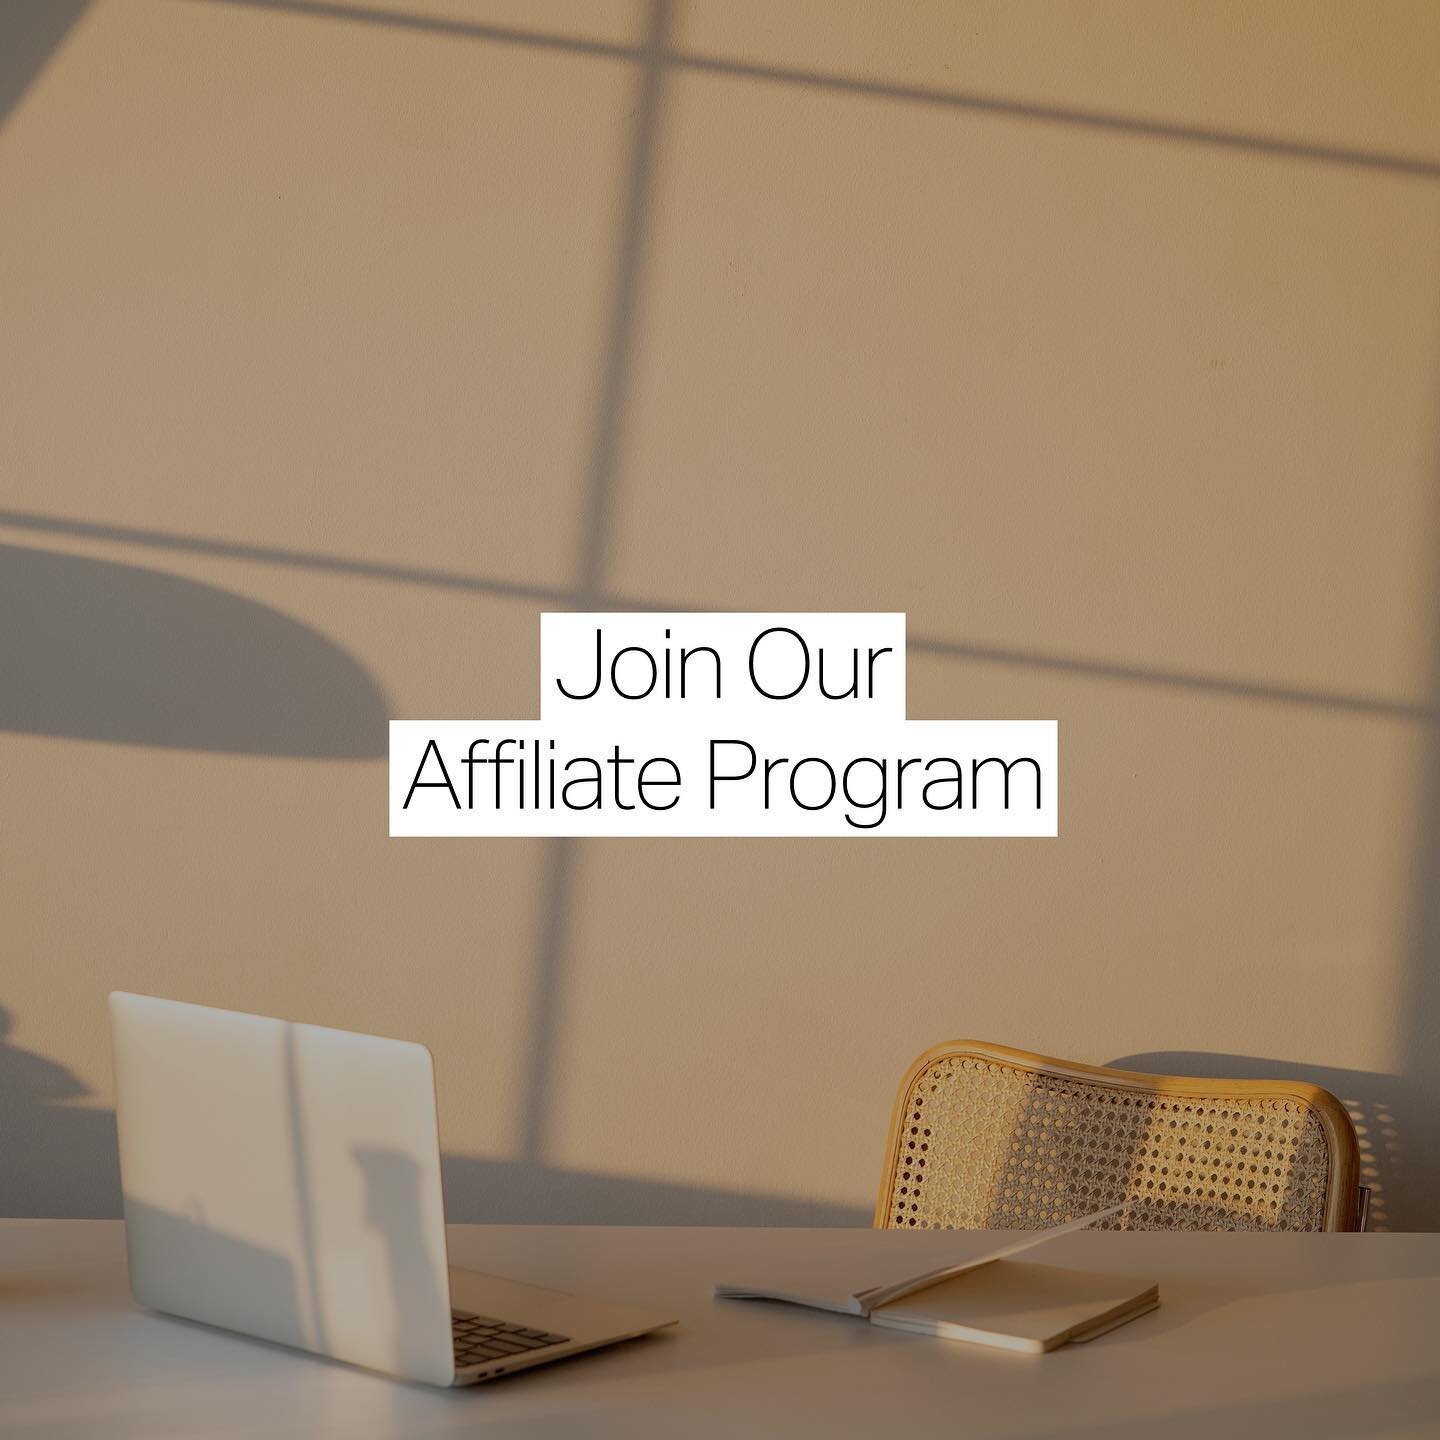 Join our affiliate team! 

Earn $30 for every website template you refer

Share an exclusive discount code with your audience

Gain access to a library of resources to inspire your content

Refer our templates to your clients, friends, readers or eve